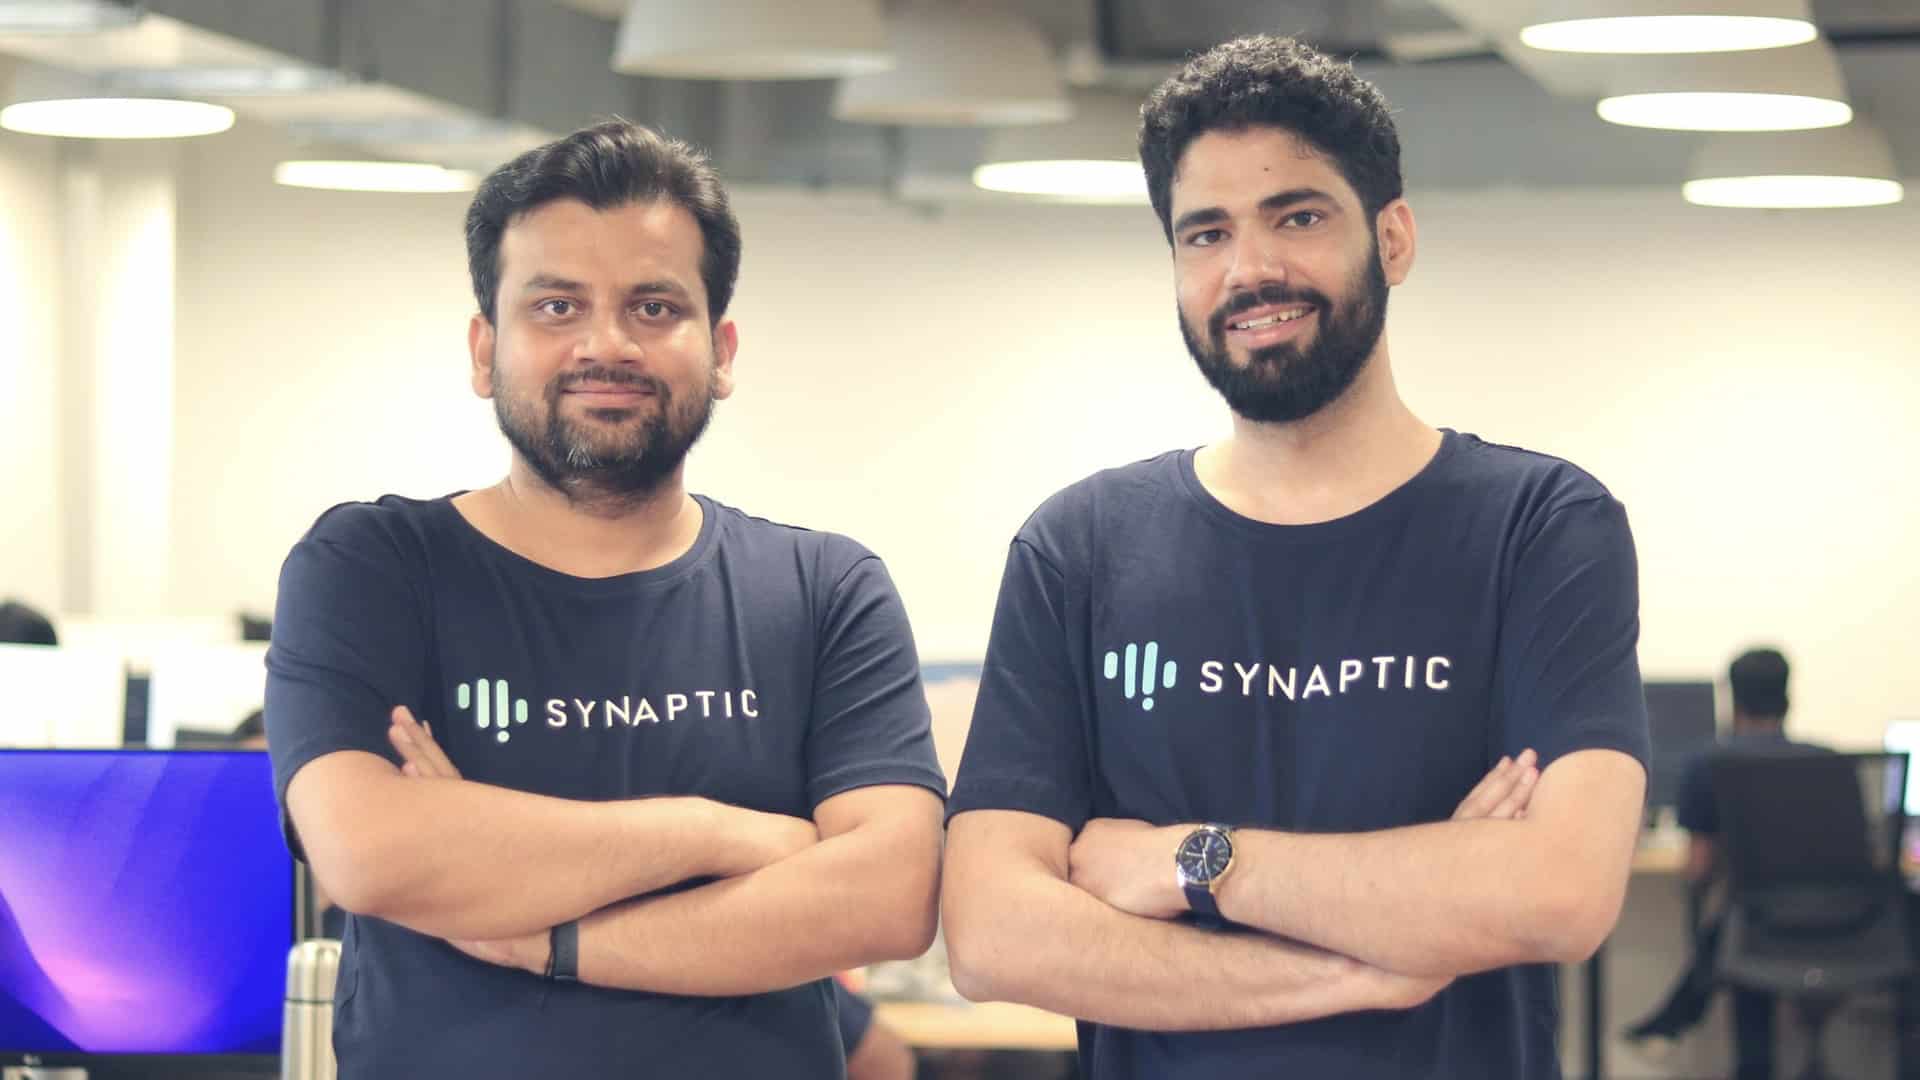 Synaptic raises $20Mn in Series B Funding Round from Valor Equity Partners